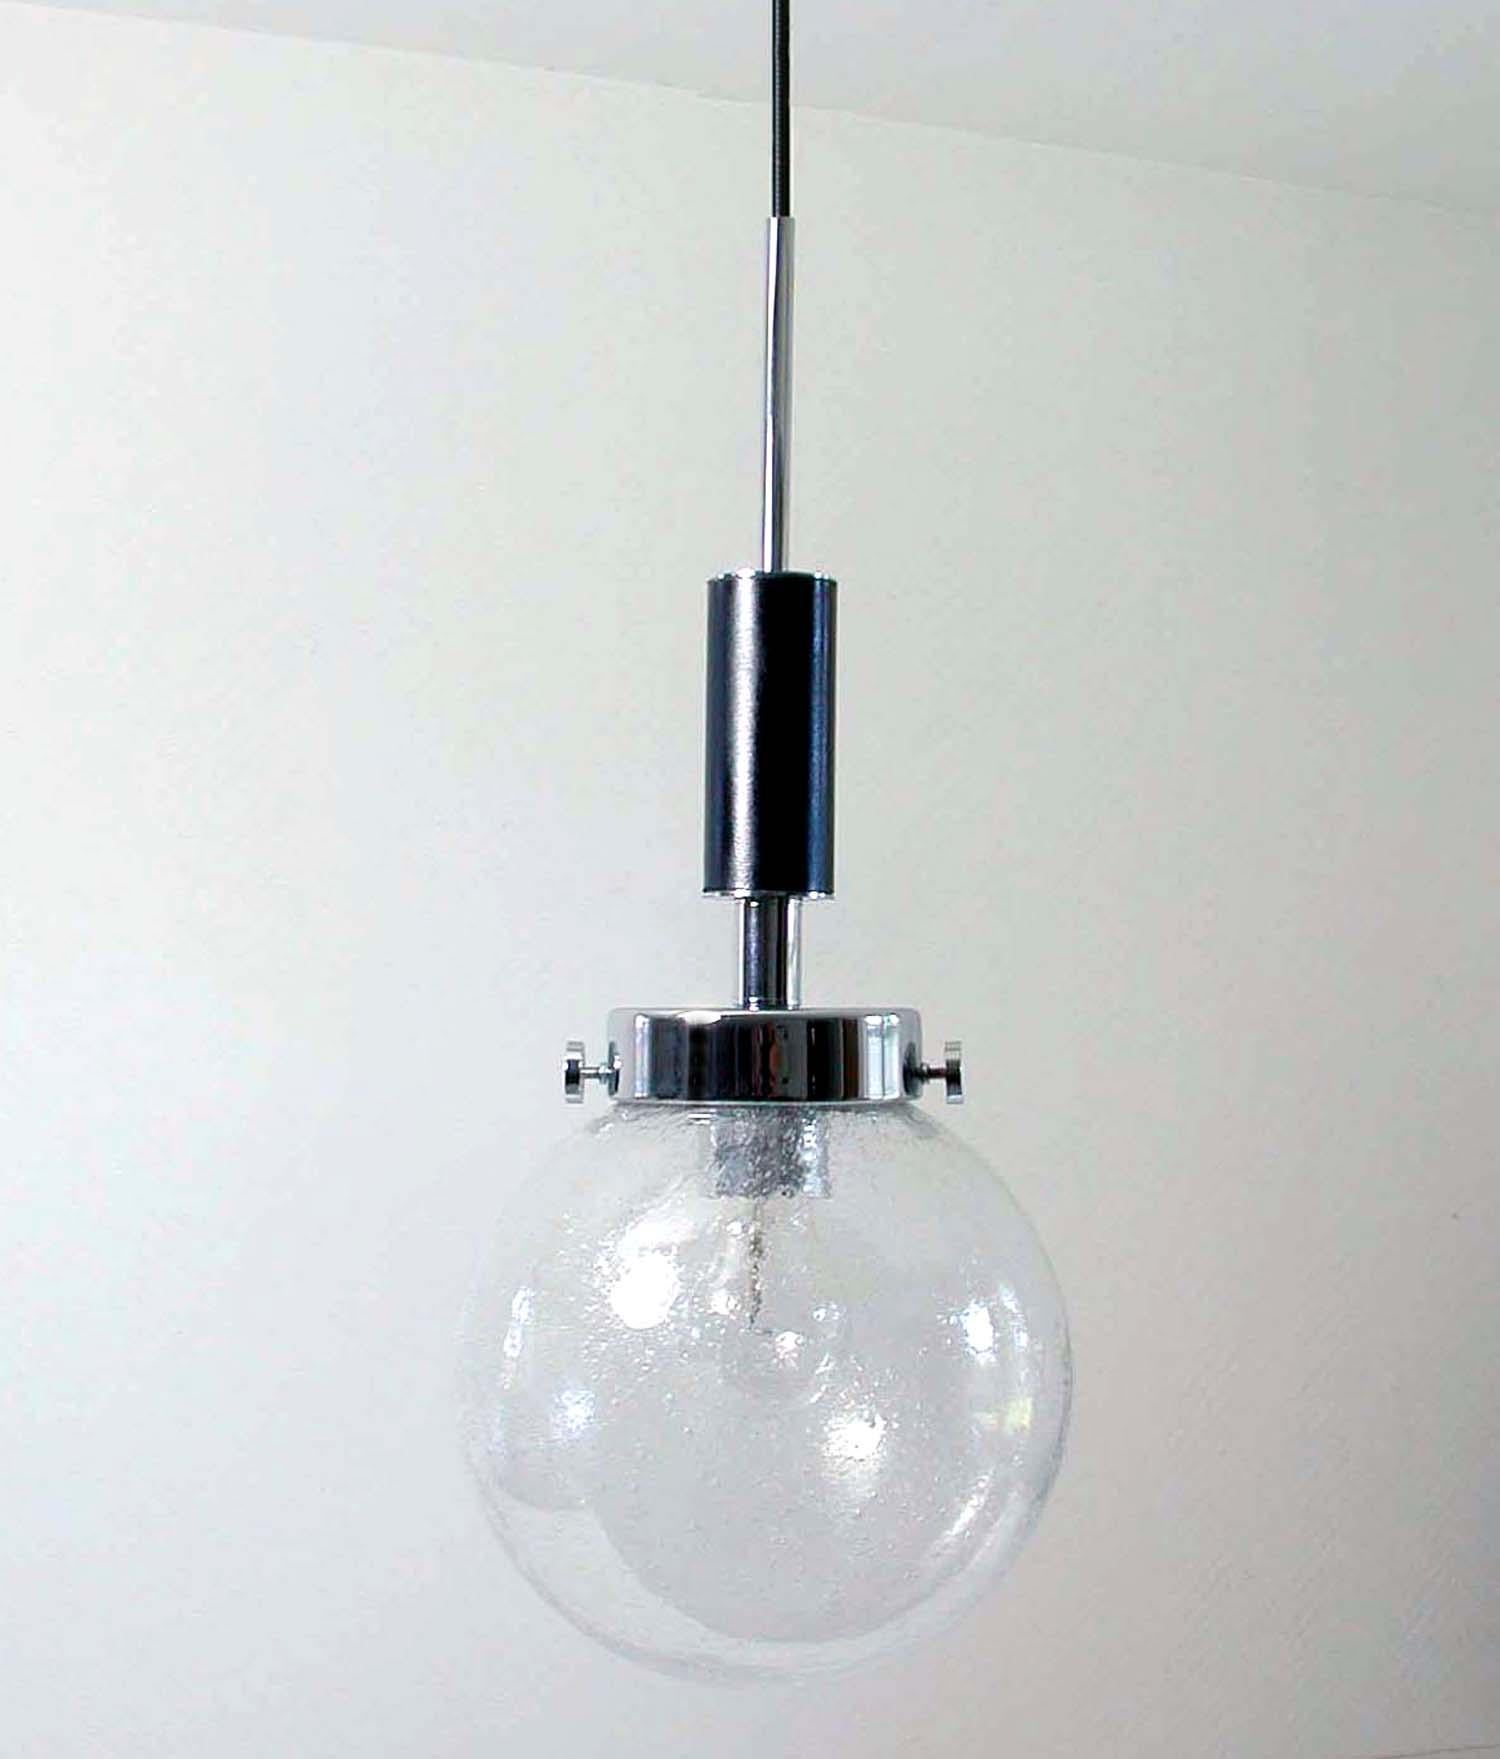 This pendant was designed and manufactured in Germany in the late 1960s. It is made of chrome and black faux leather and has got a clear glass bubble lamp shade.

There are 4 pendants available.

Length of wiring can be customized. The height is